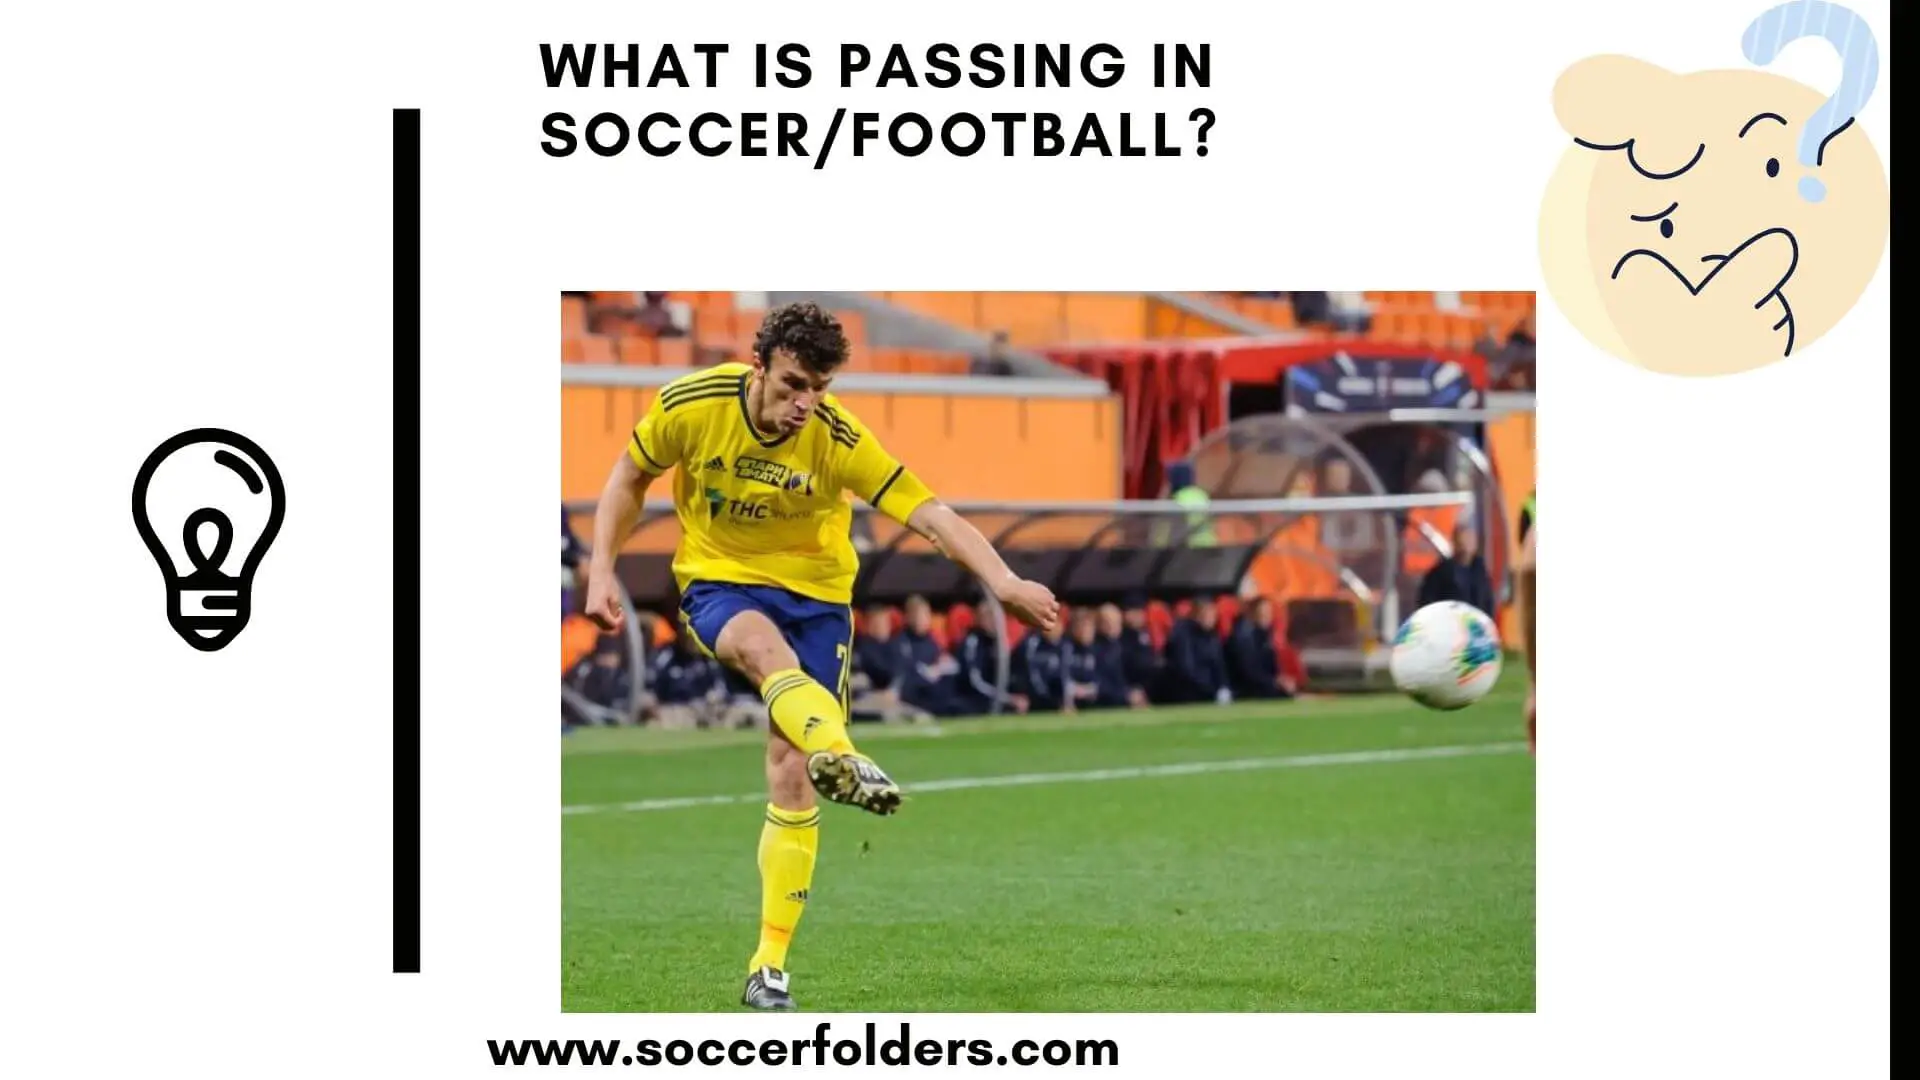 What is passing in soccer - Featured image